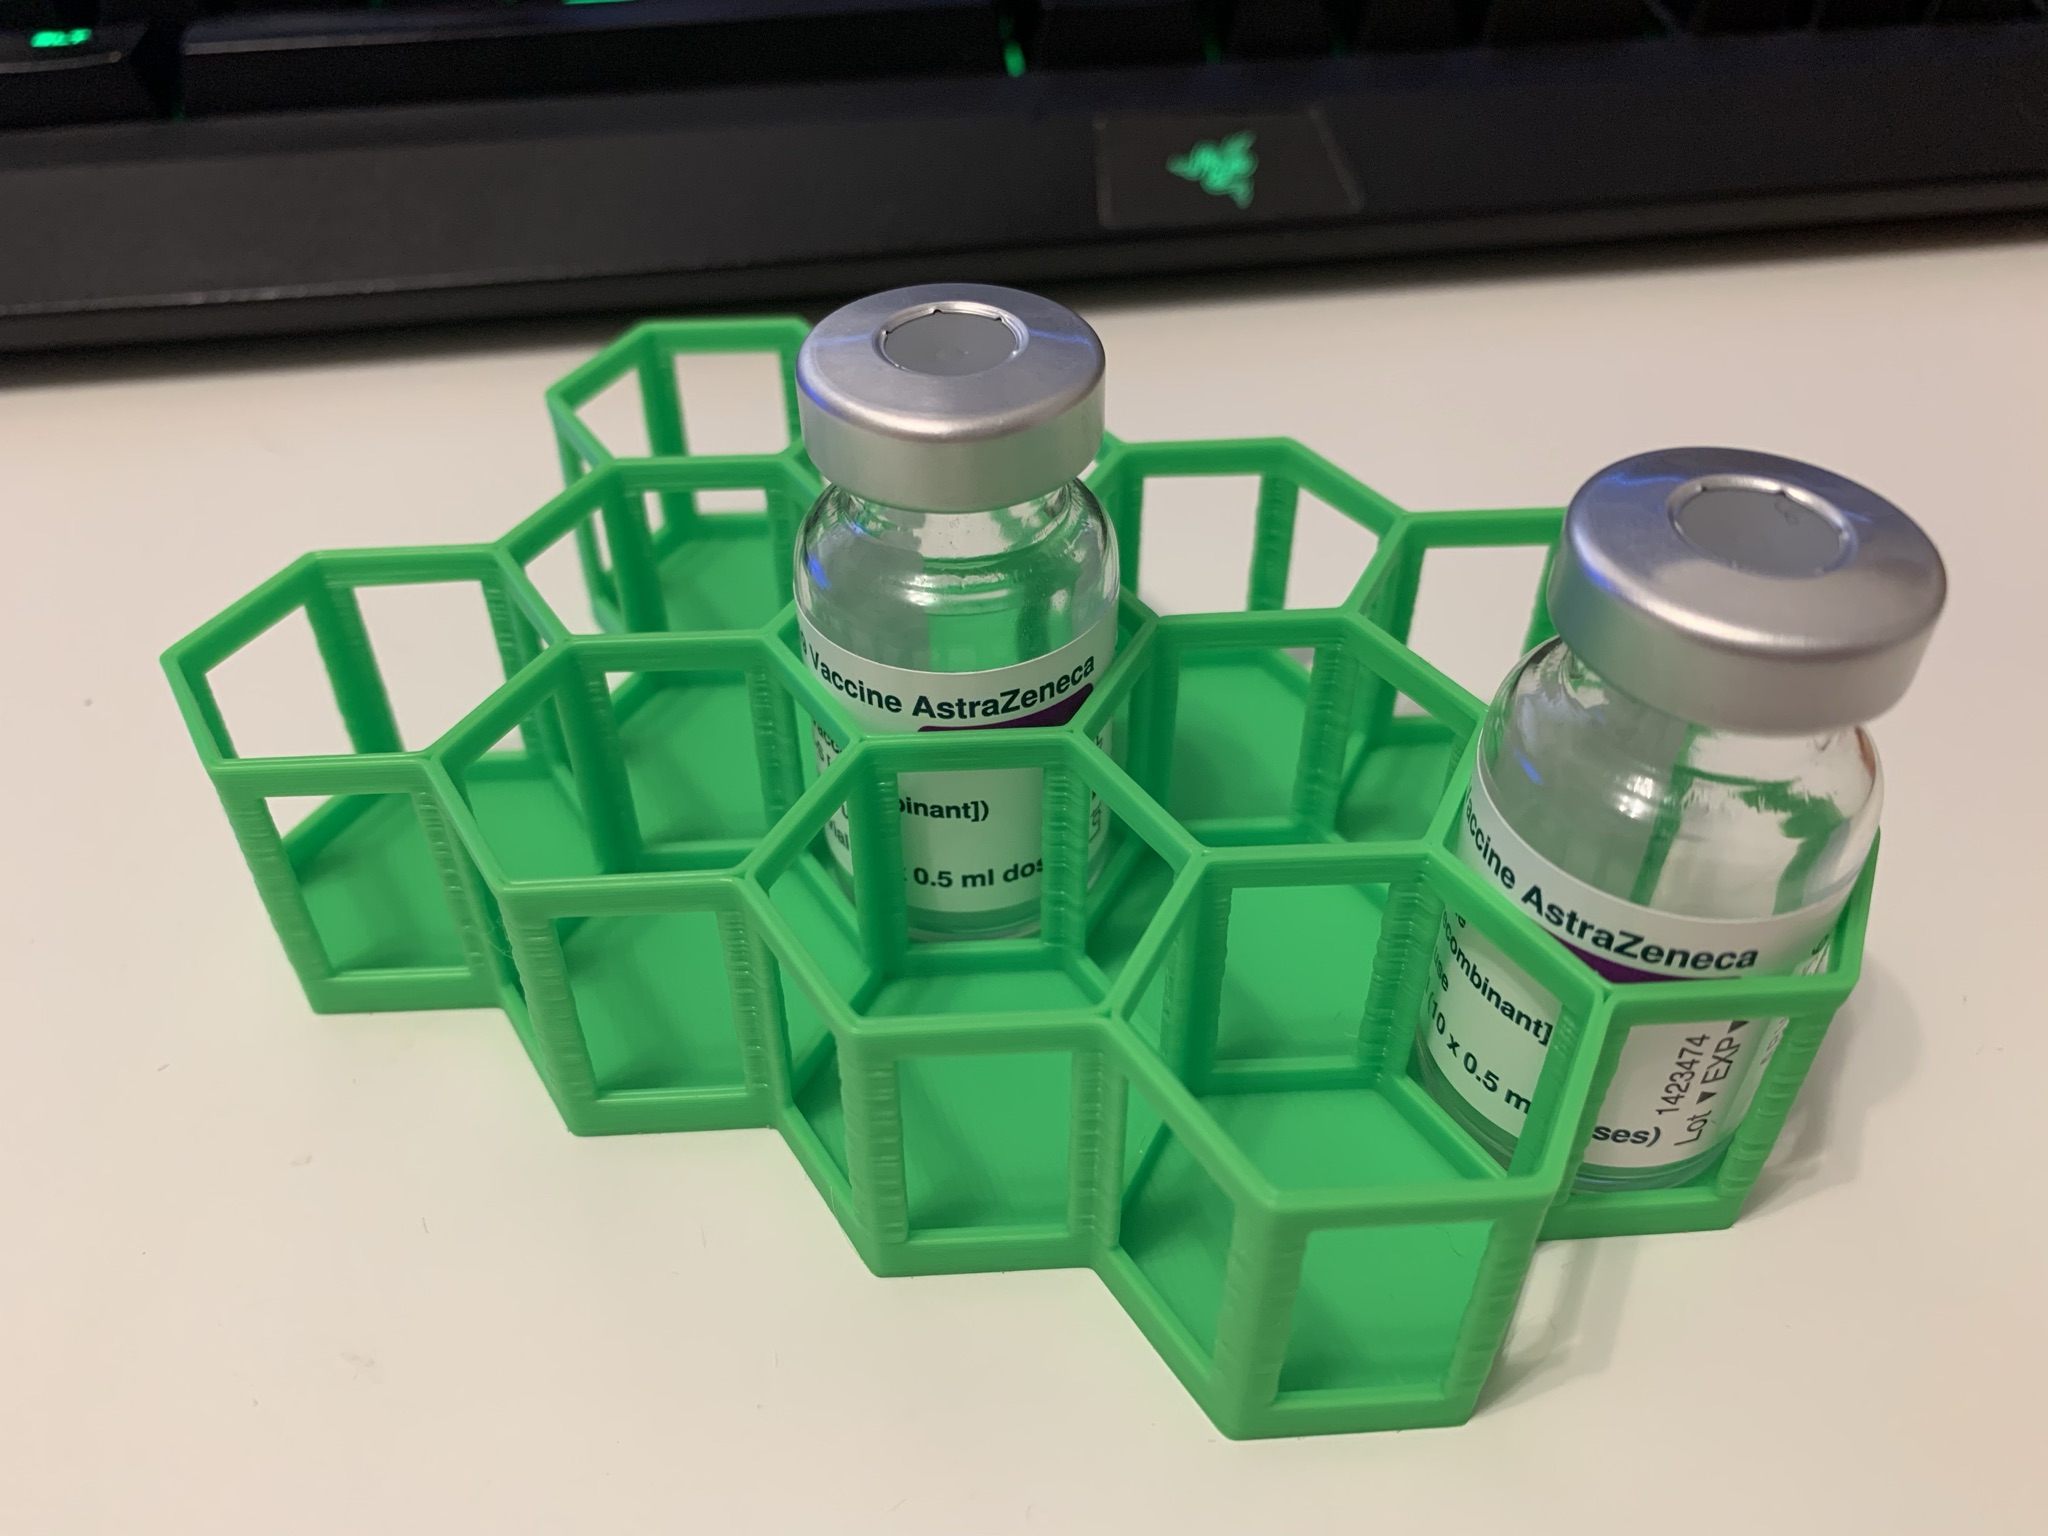 Compatible with the 3rd vaccination] Set of 5 vial holders for vaccines  made by New Color Moderna. ! – J-BOX COLD CHAIN STORE